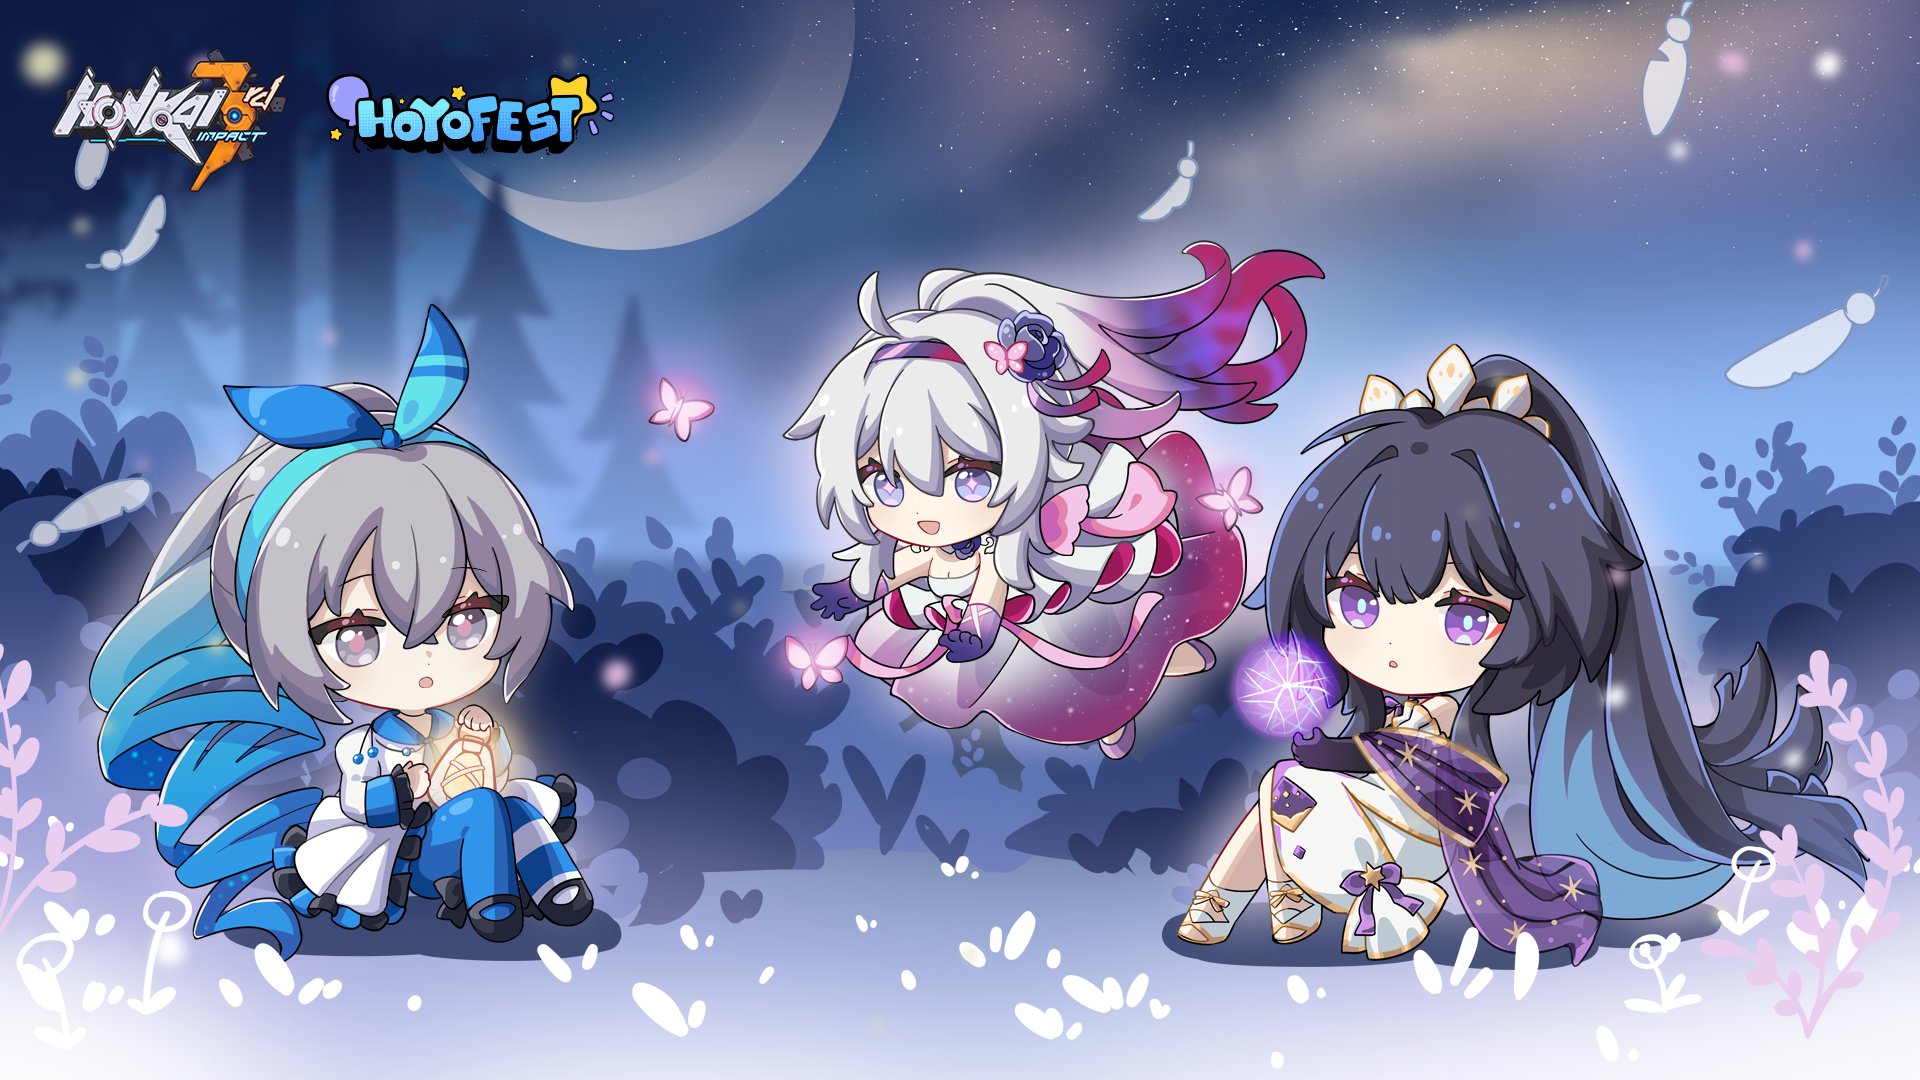 Flipper marked Dam Honkai Impact 3rd on Twitter: "HoYo FEST 2023 coming soon! 〓 HoYo FEST 2023  Official Site Launched 〓 Go to the event website of HoYo FEST to check out  details~ Play the